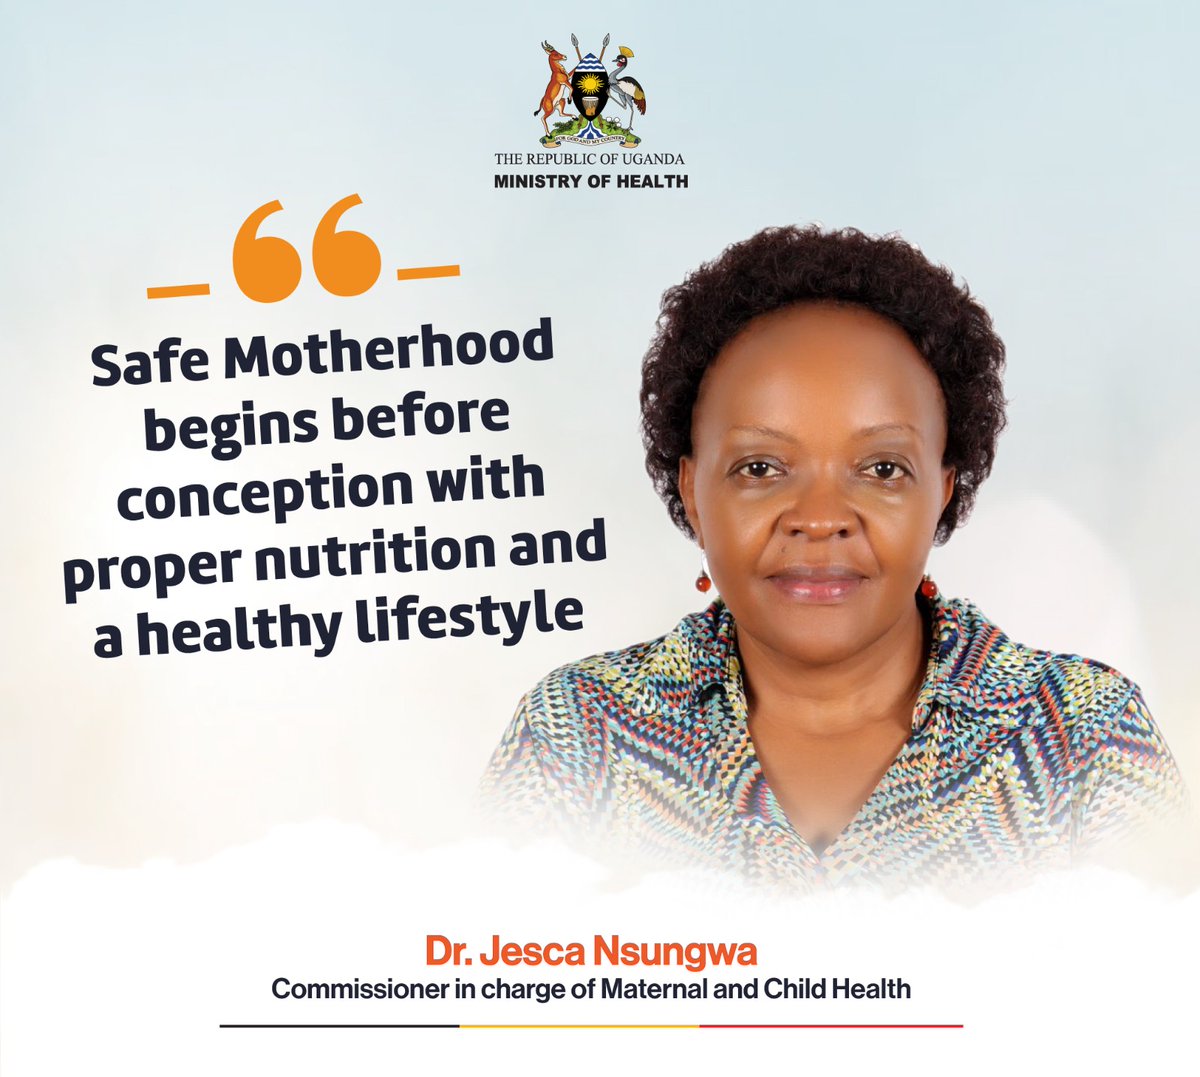 Dear Ladies, 
#SafeMotherhood begins before you conceive the baby. It begins with proper nutrition - a balanced diet rich in vegetables & fruits, daily exercise for at least 30 minutes, no alcohol/tobacco consumption.

A healthy lifestyle is important for you and your unborn baby